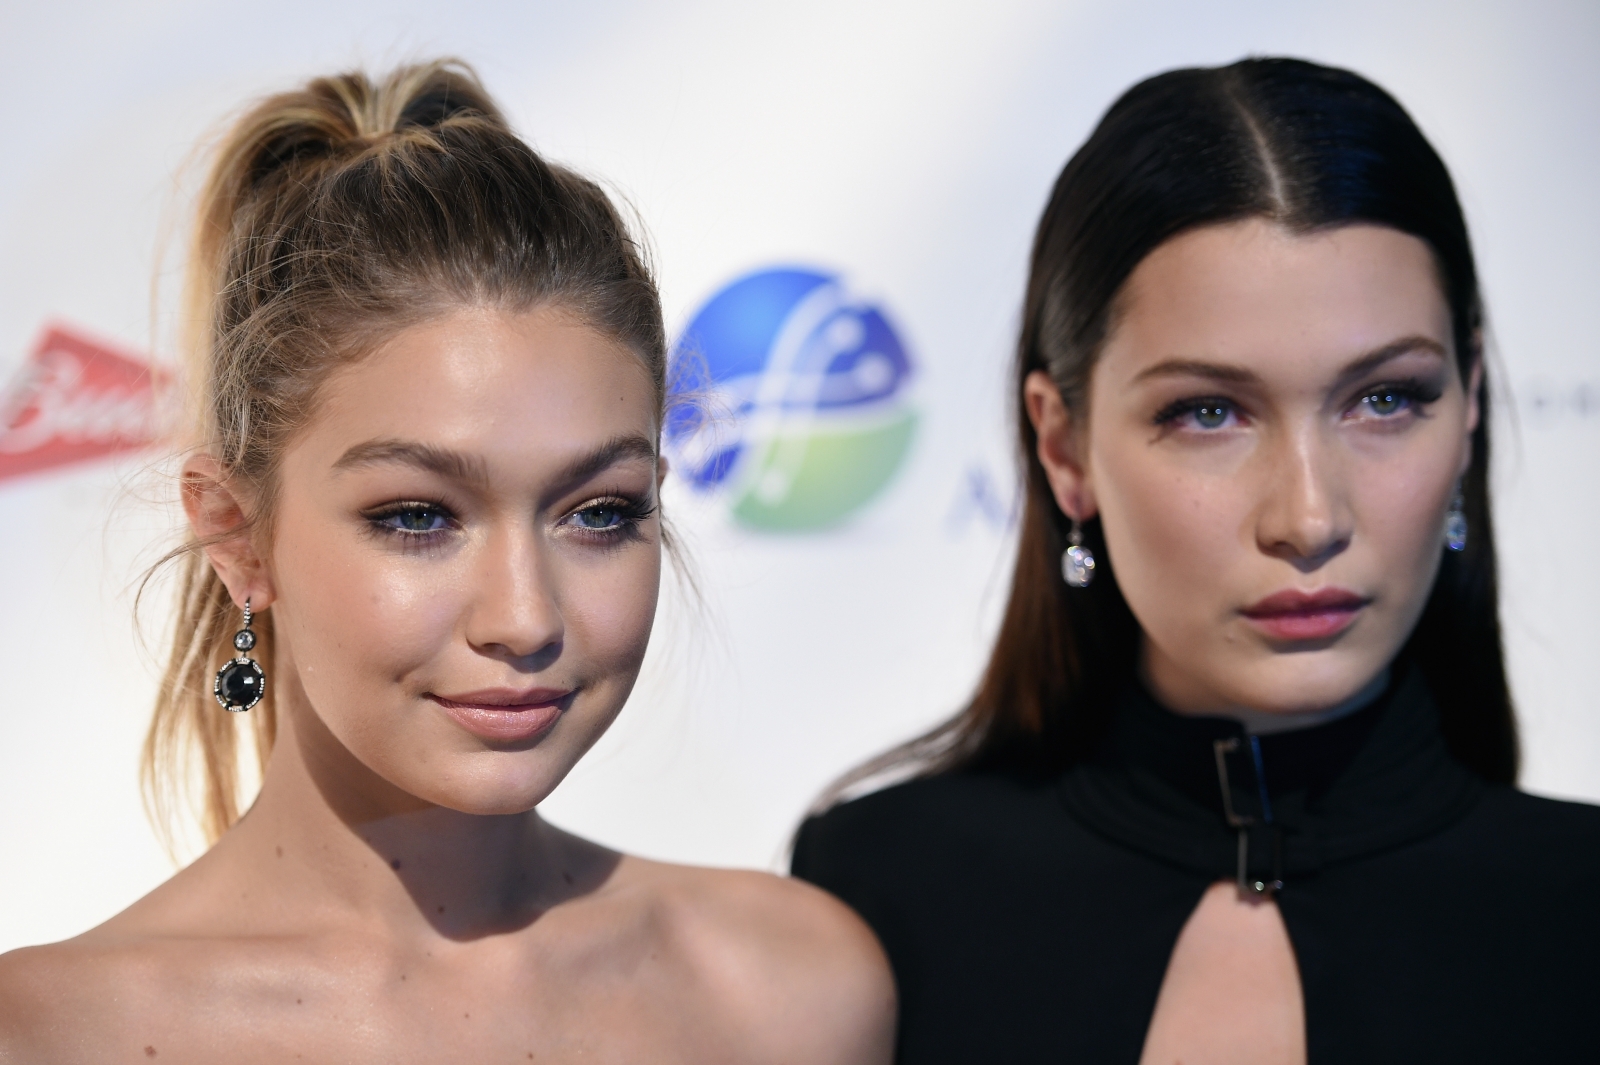 'Not appropriate at all' – Gigi and Bella Hadid spark furious row over